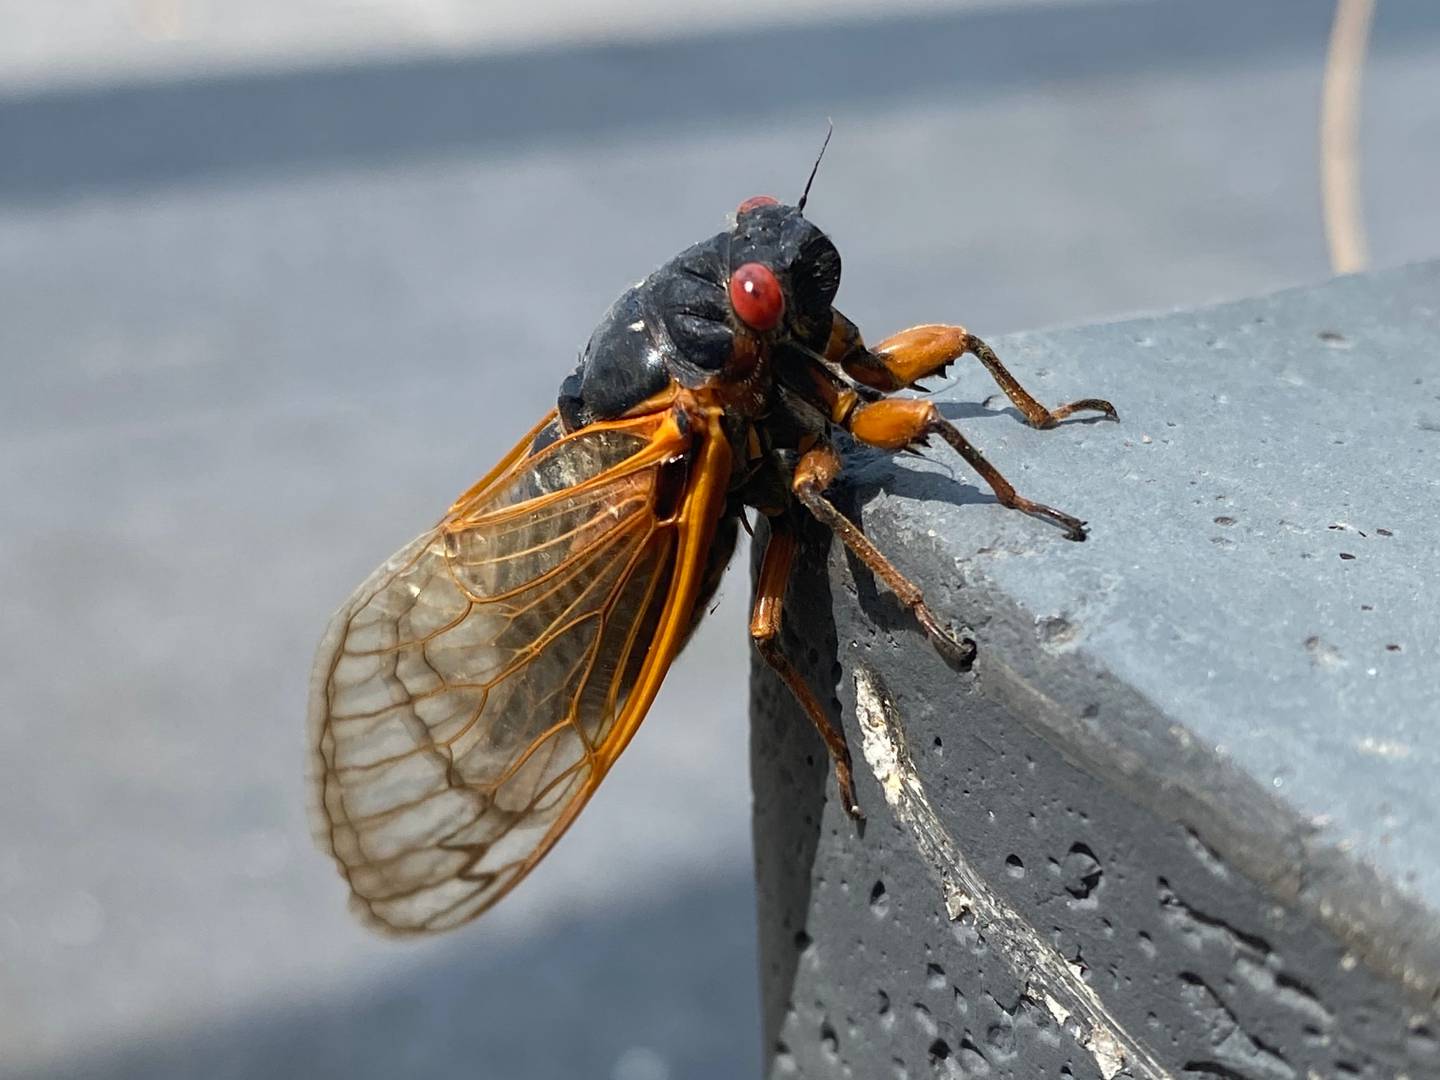 A cicada sitting on the ground in 2021.